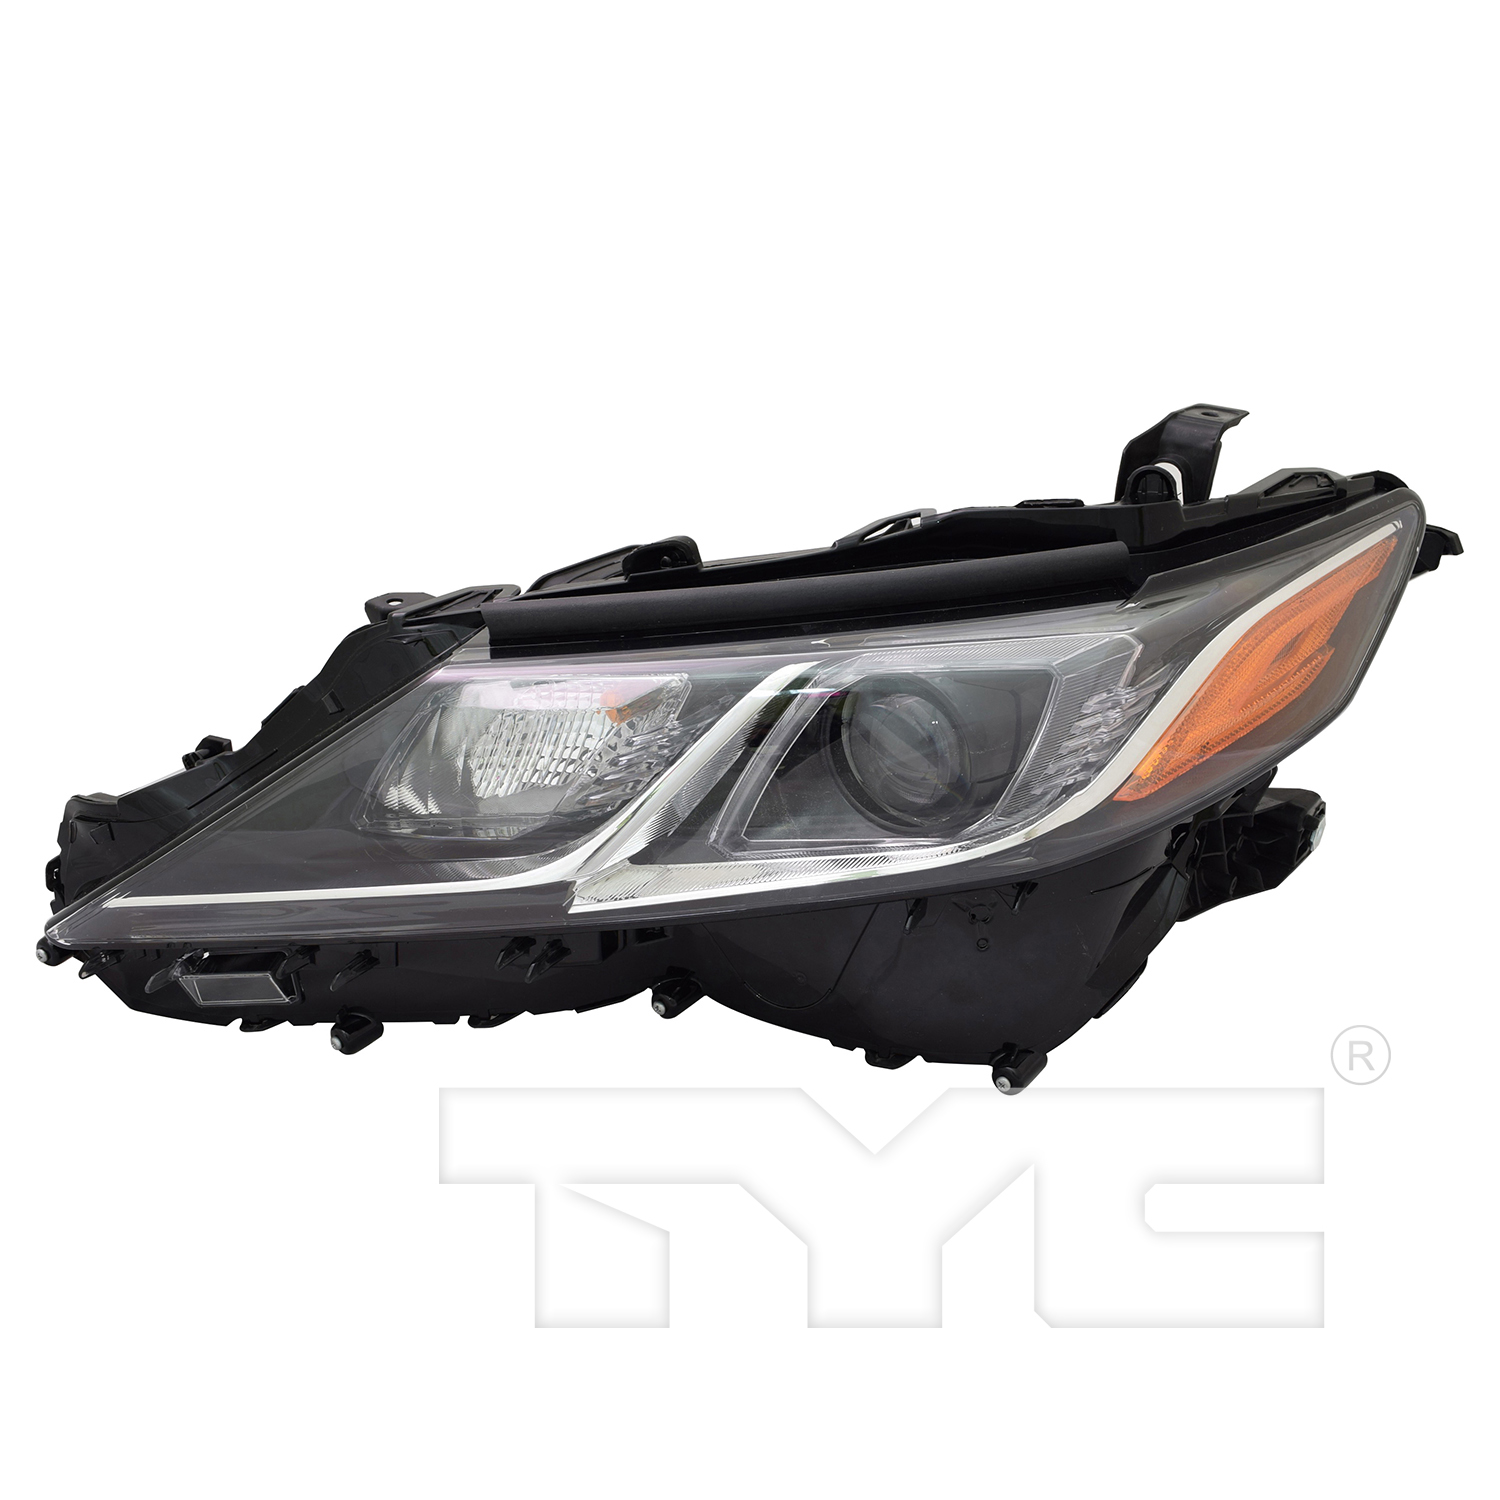 Aftermarket HEADLIGHTS for TOYOTA - CAMRY, CAMRY,18-18,LT Headlamp assy composite